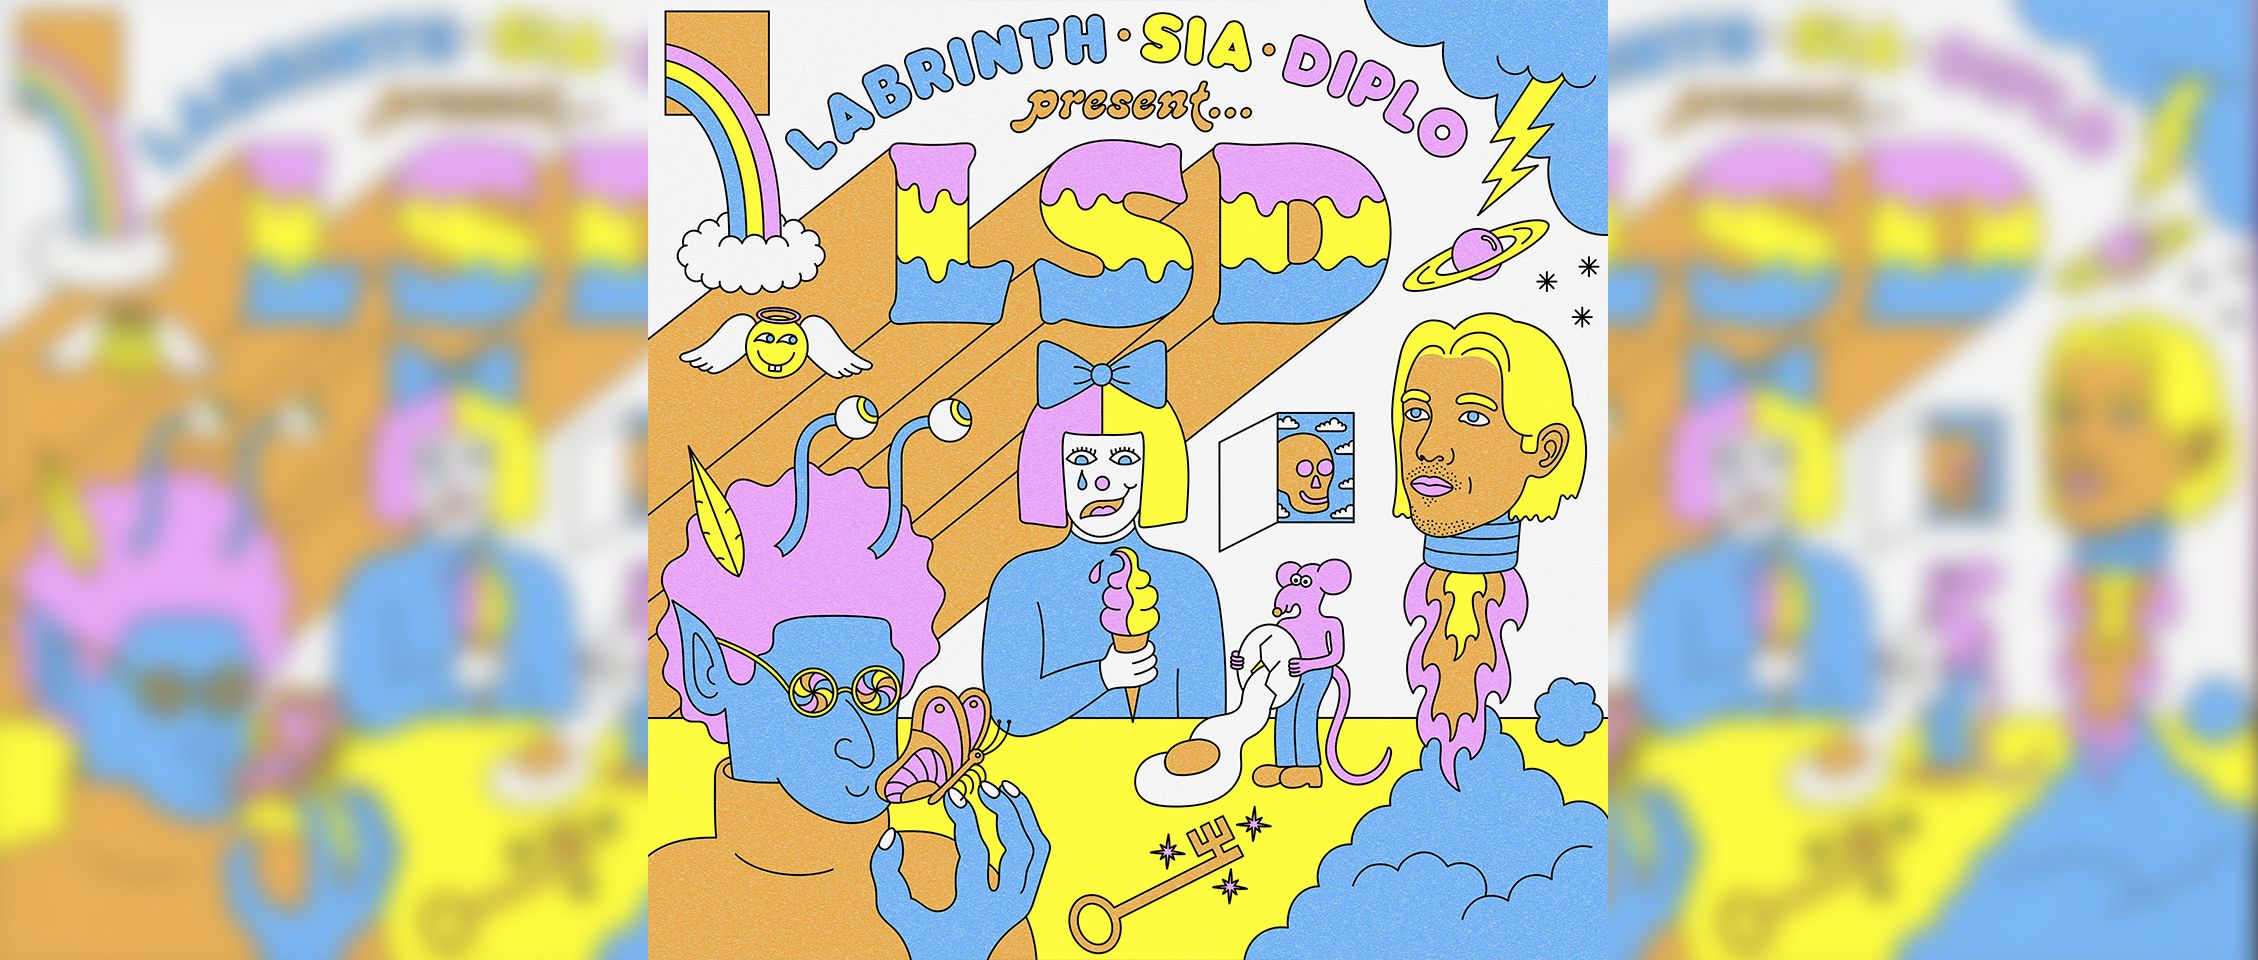 Labrinth, Sia & Diplo Present… nothing new